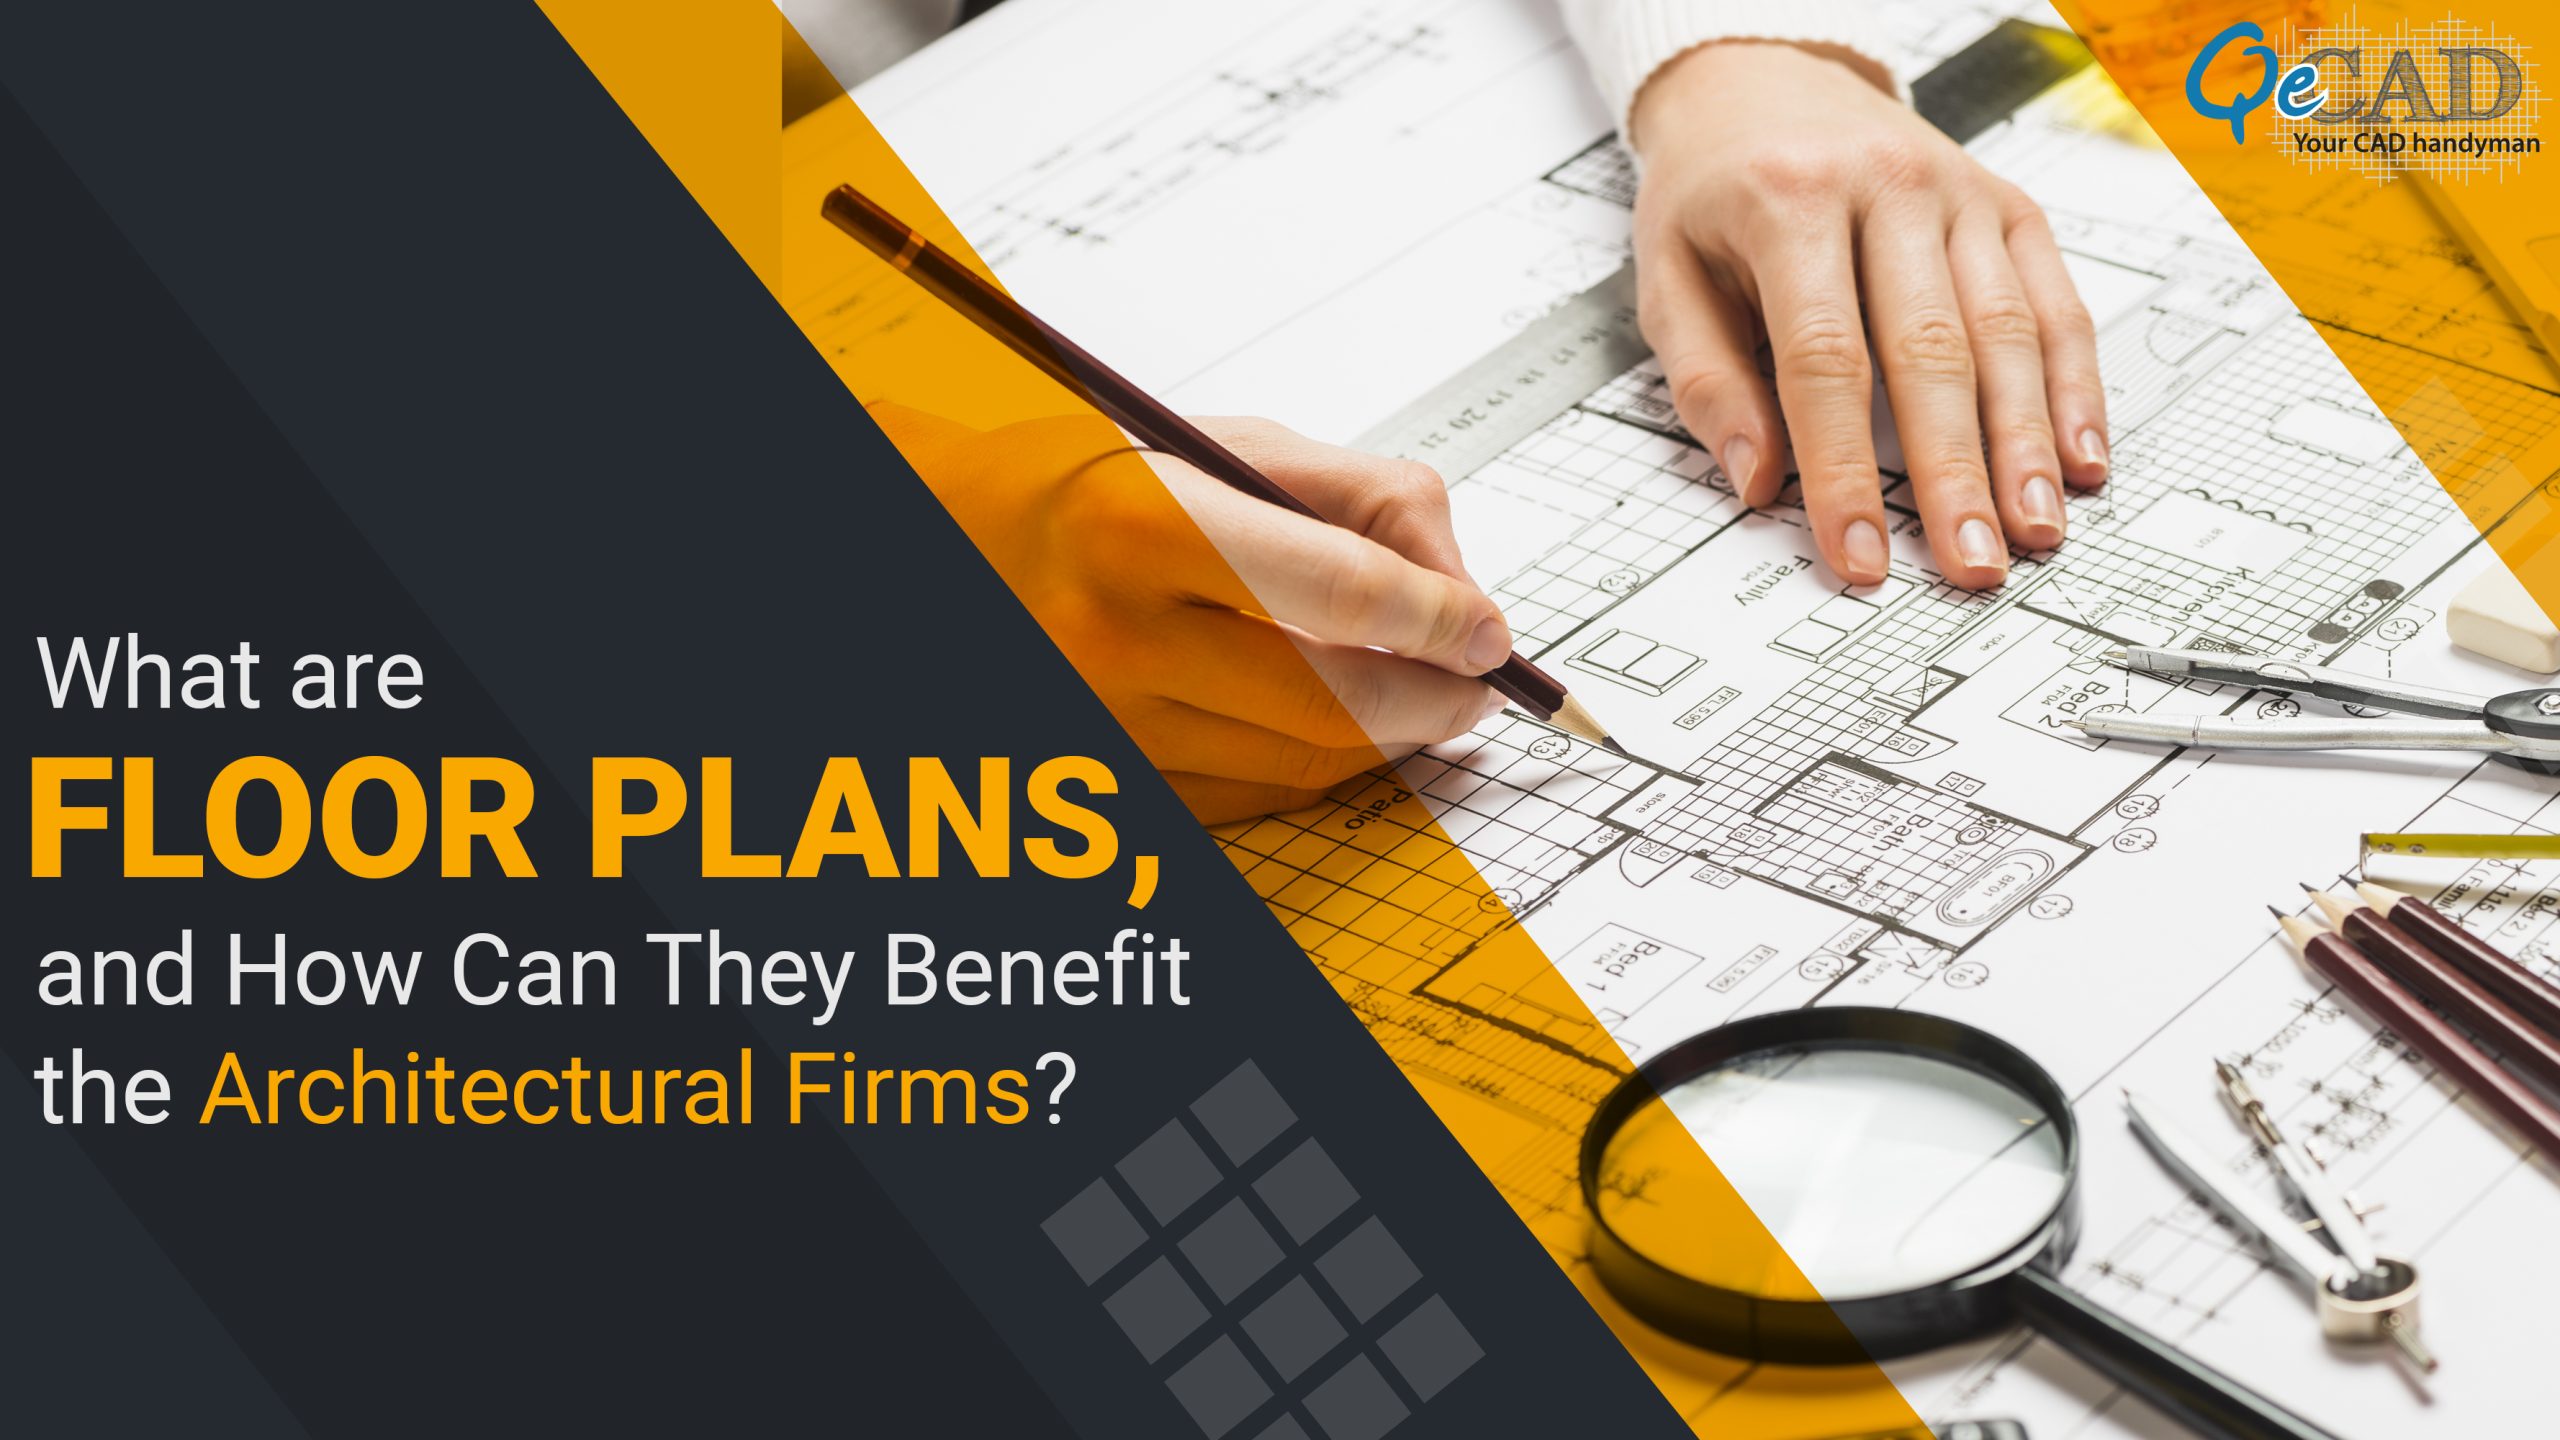 What are Floor Plans, and How Can They Benefit the Architectural Firms?